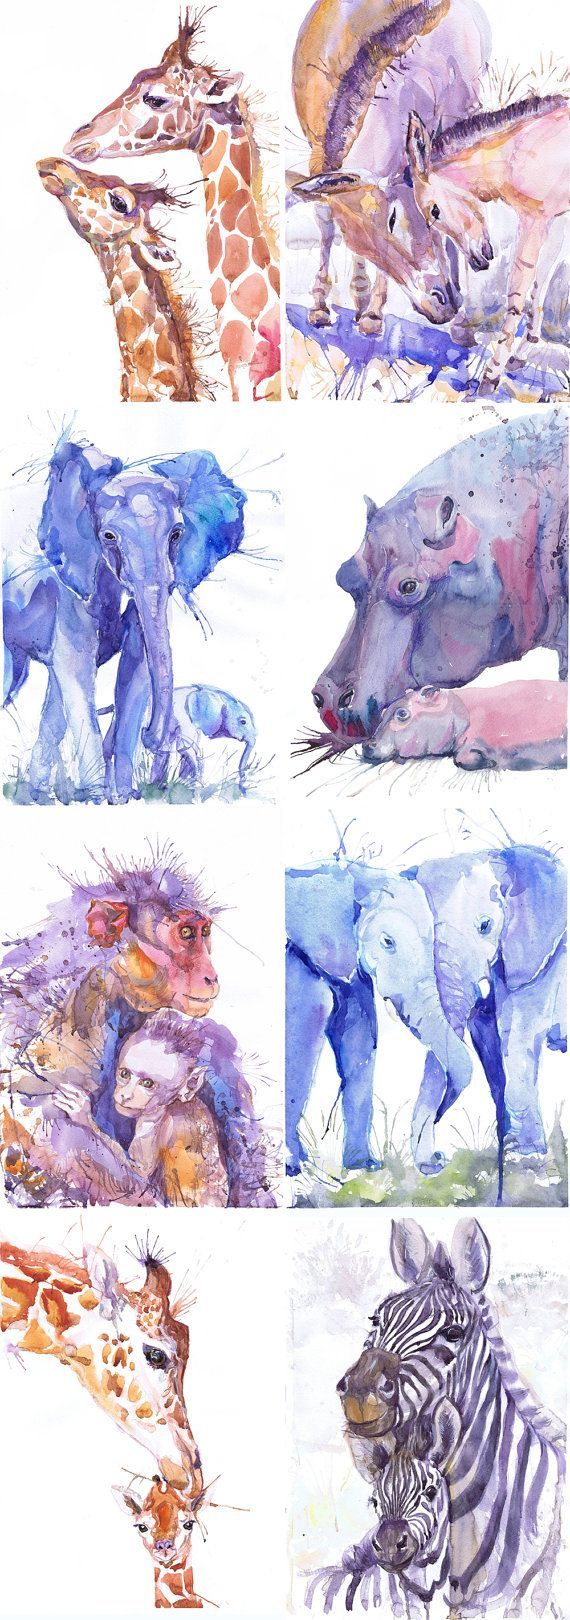 ACEO Artist Trading Cards Art Prints Watercolor Painting Jungle Safari Animals ATC Giclee, Set of 8 Si